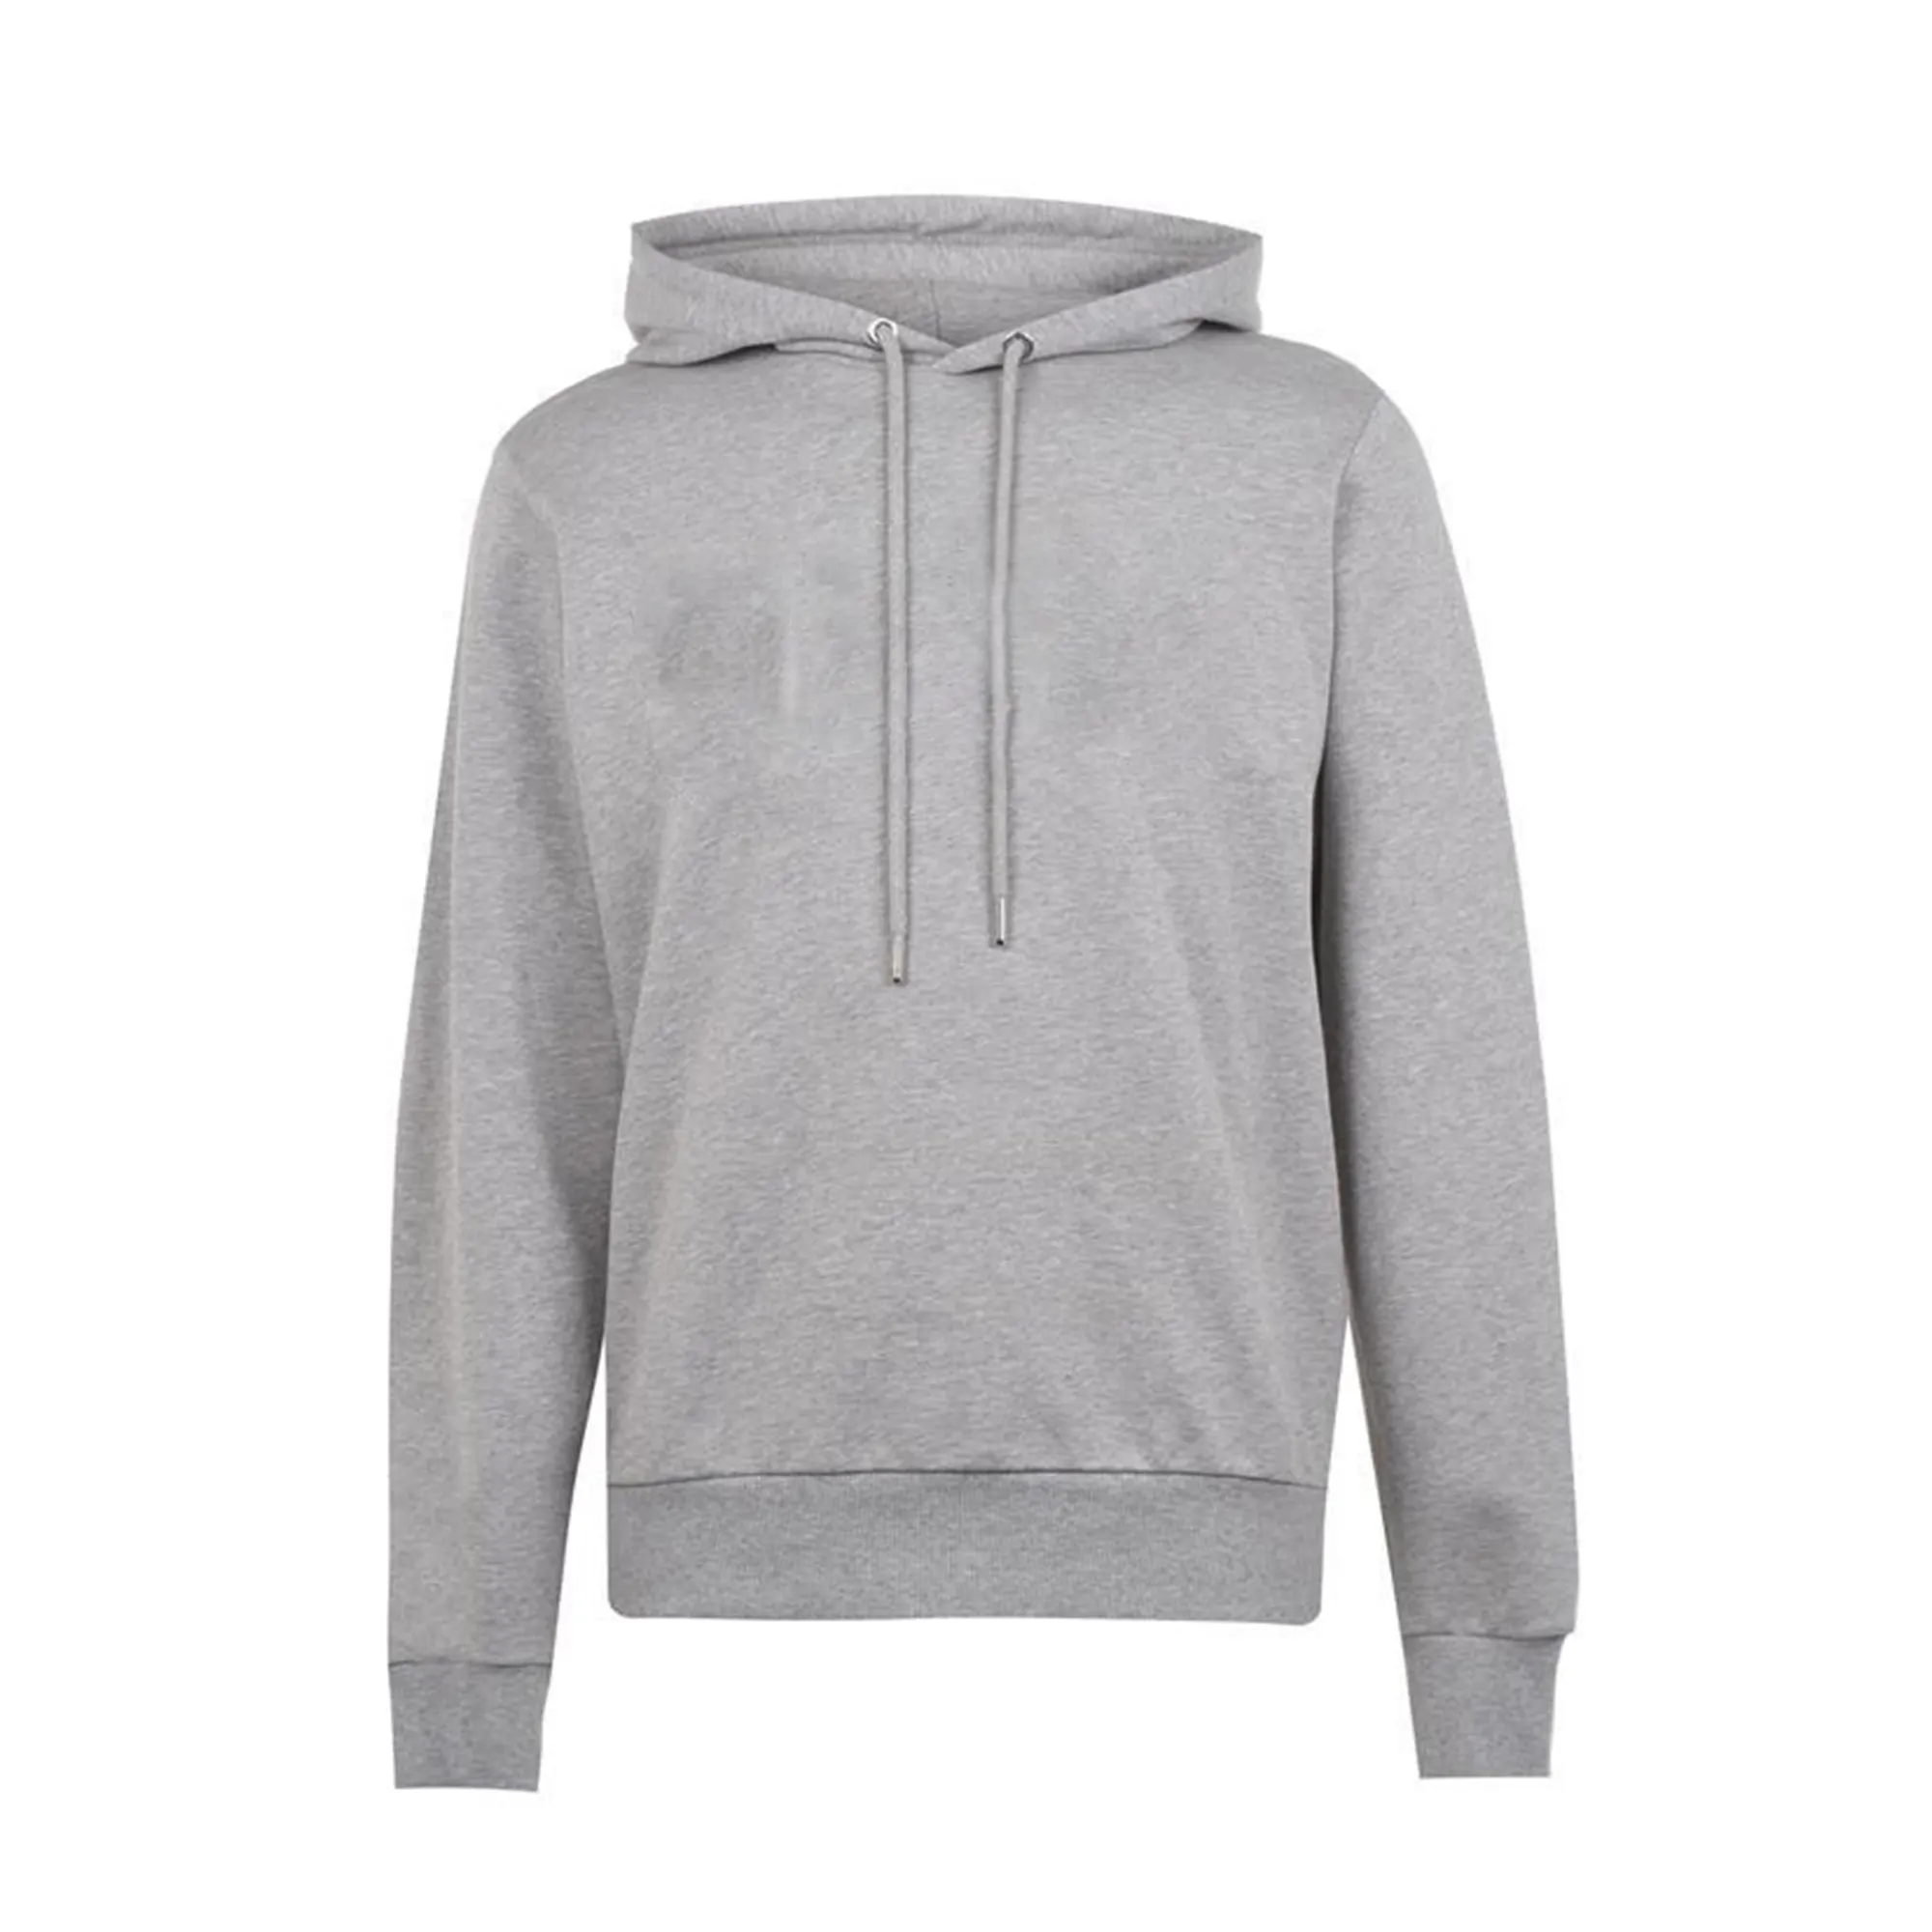 Custom color and logo Pullover Hoodies Men with pocket and drawstring hoodie in high quality suitable price made in america